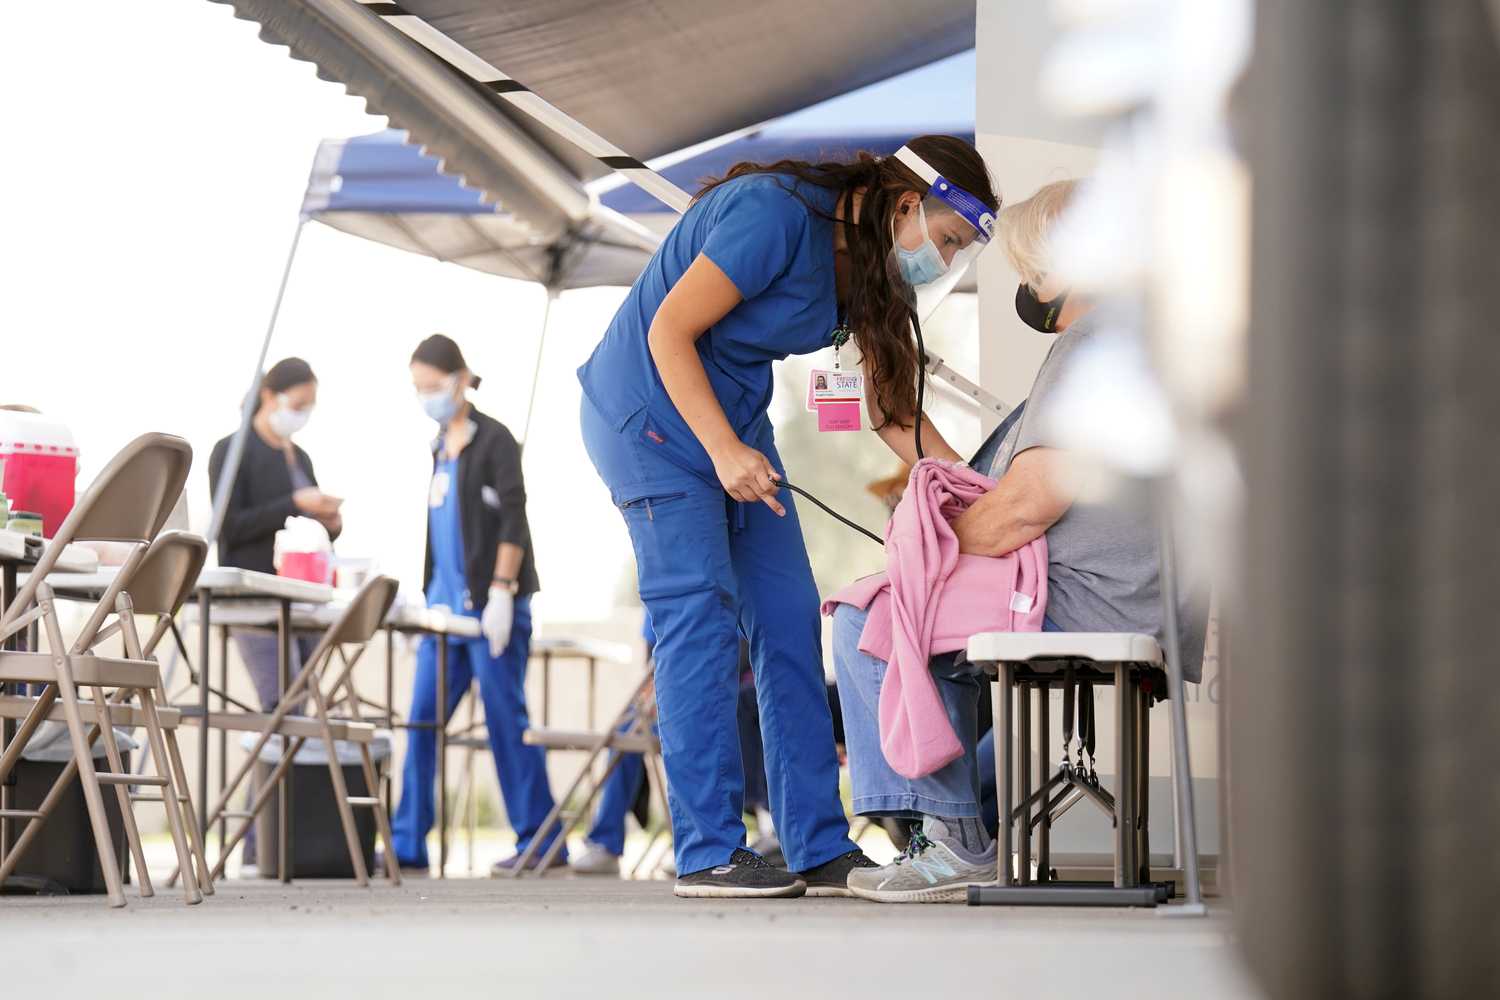 Fresno State nursing students administer COVID-19 vaccines and conduct health screenings with the Mobile Health Unit. (Cary Edmondson/Fresno State)